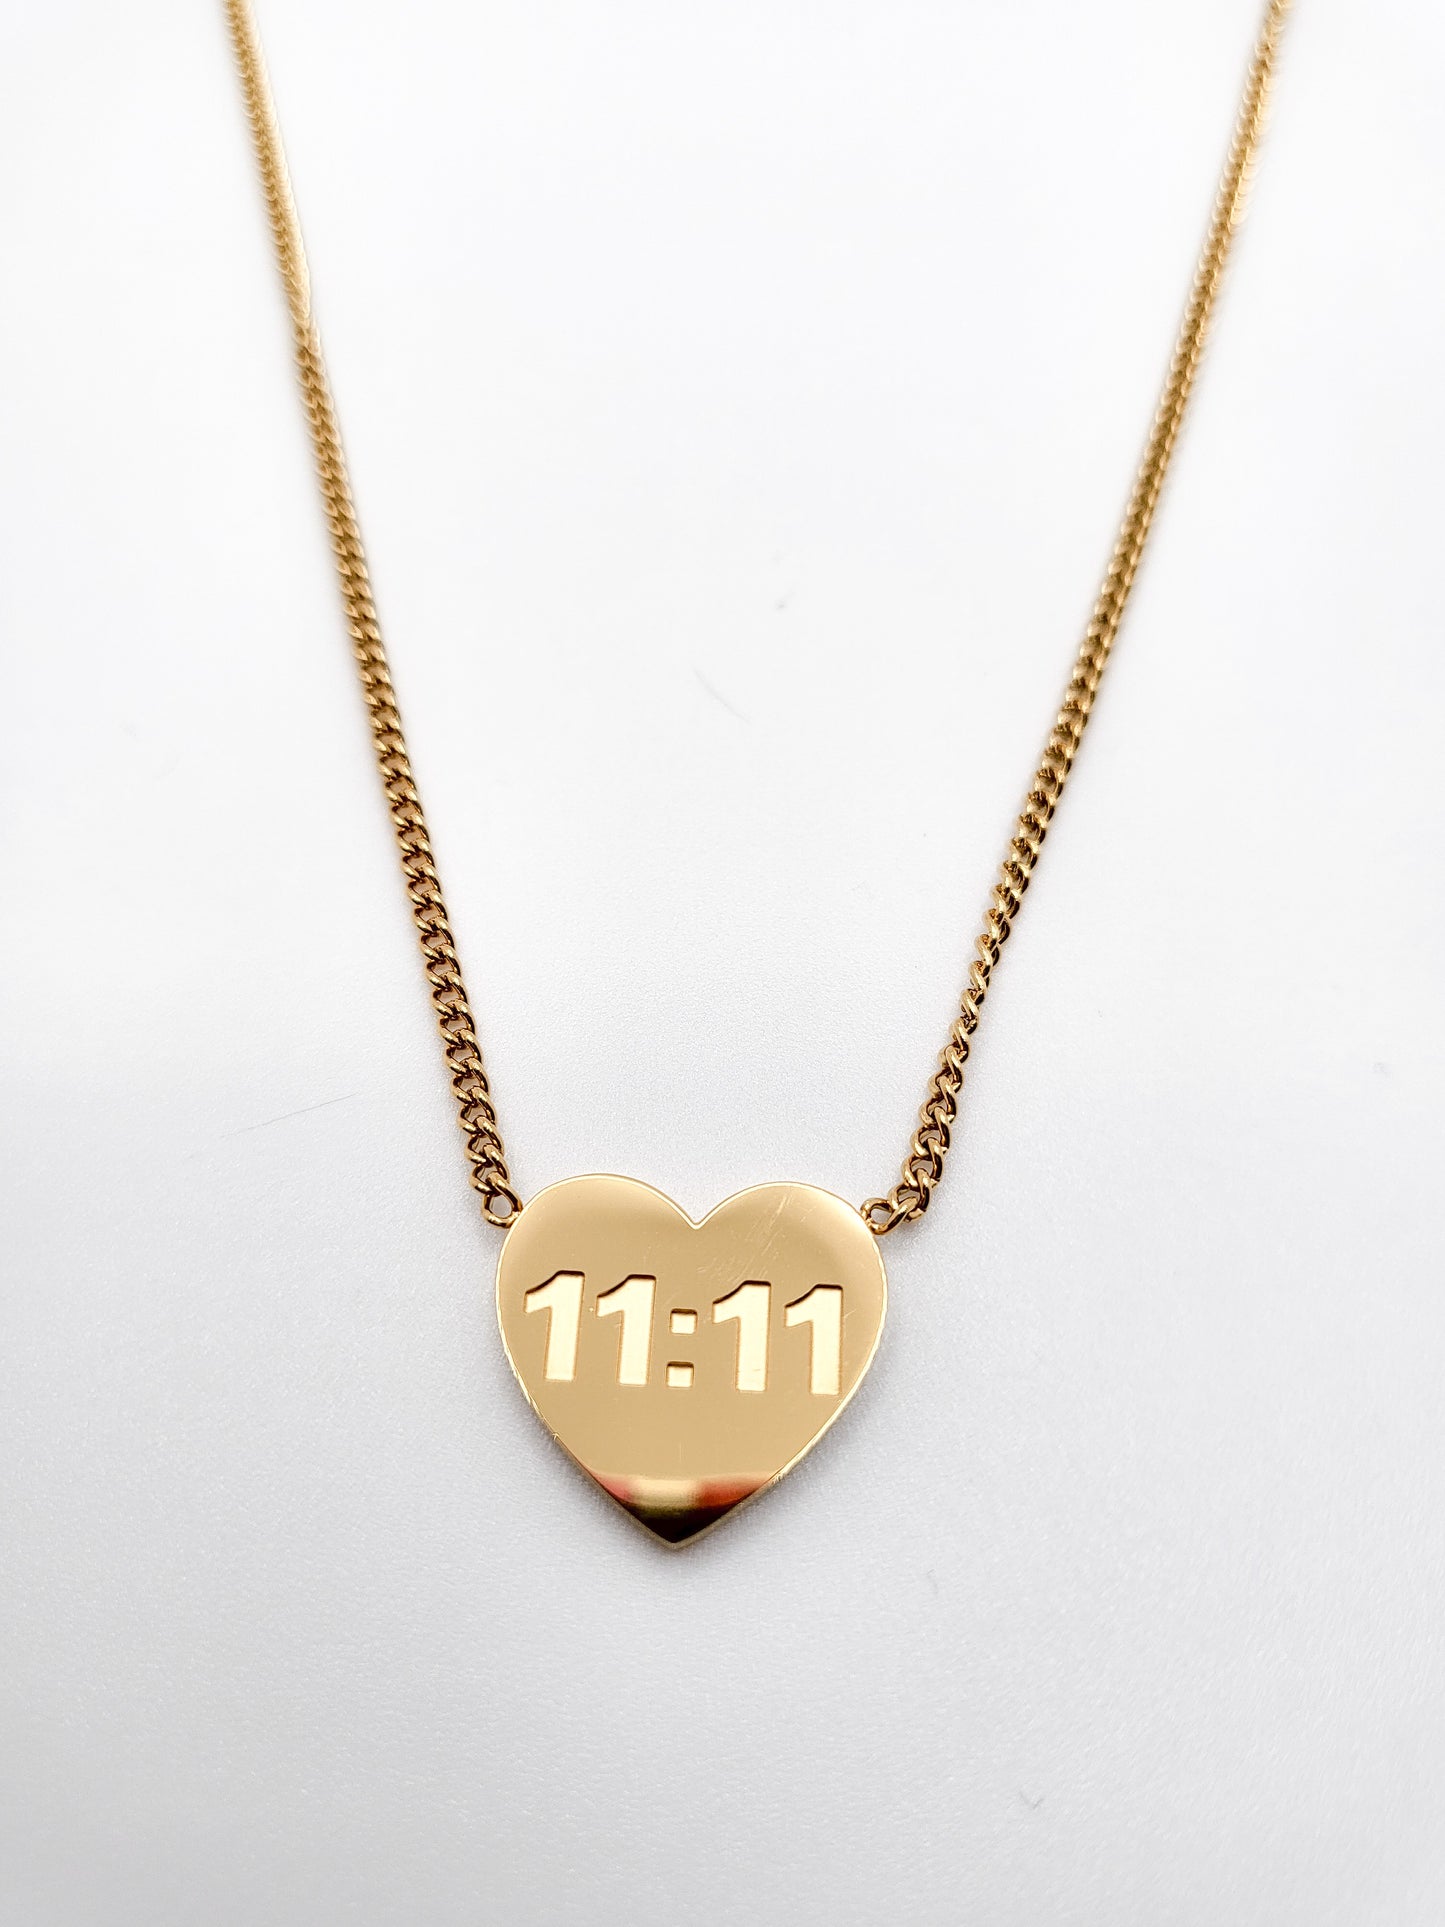 11:11 heart shaped pendant gold plated necklace